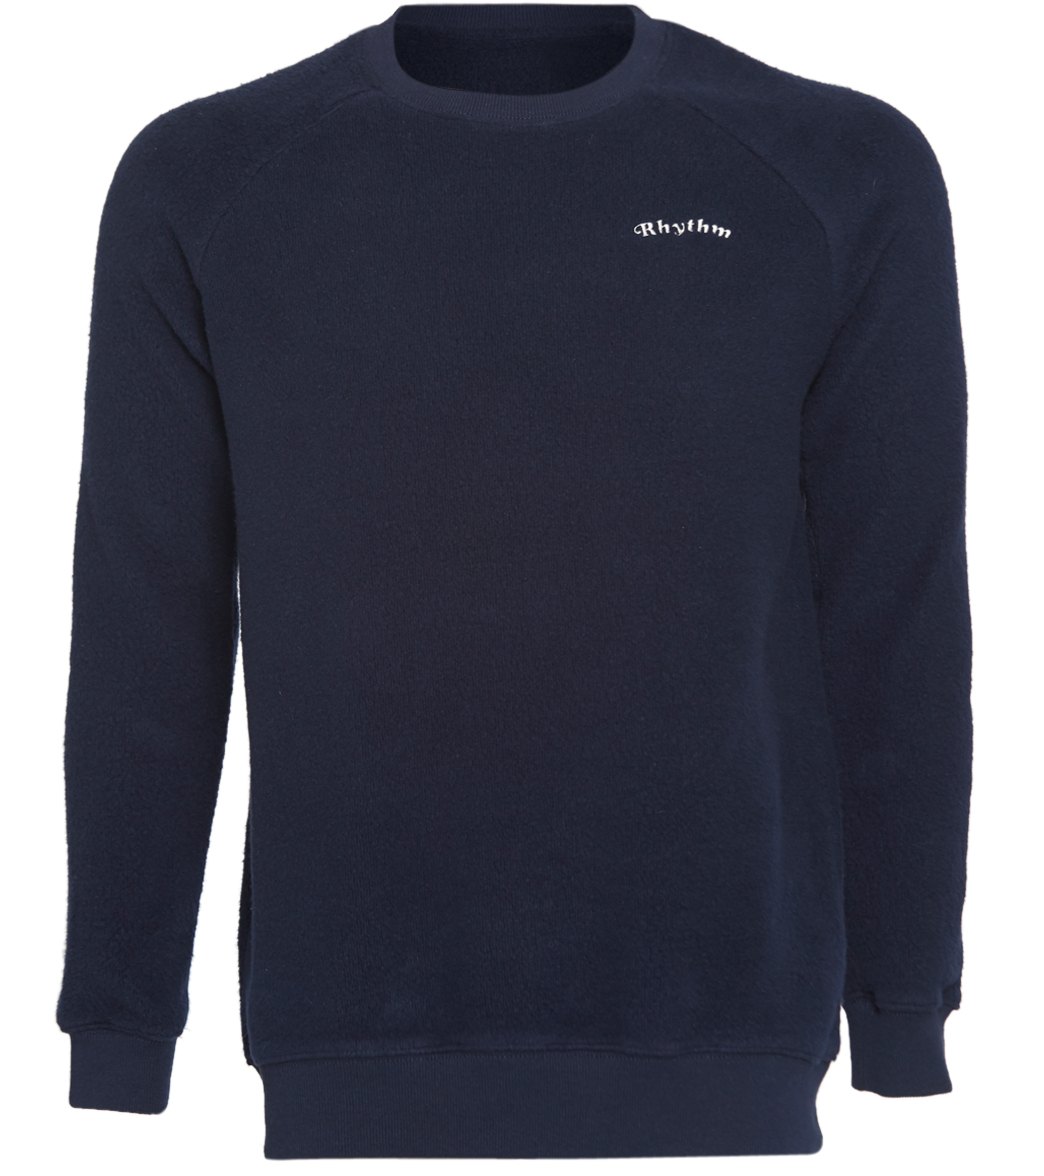 Rhythm Vintage Pullover Sweater Shirt - Navy Small Cotton - Swimoutlet.com